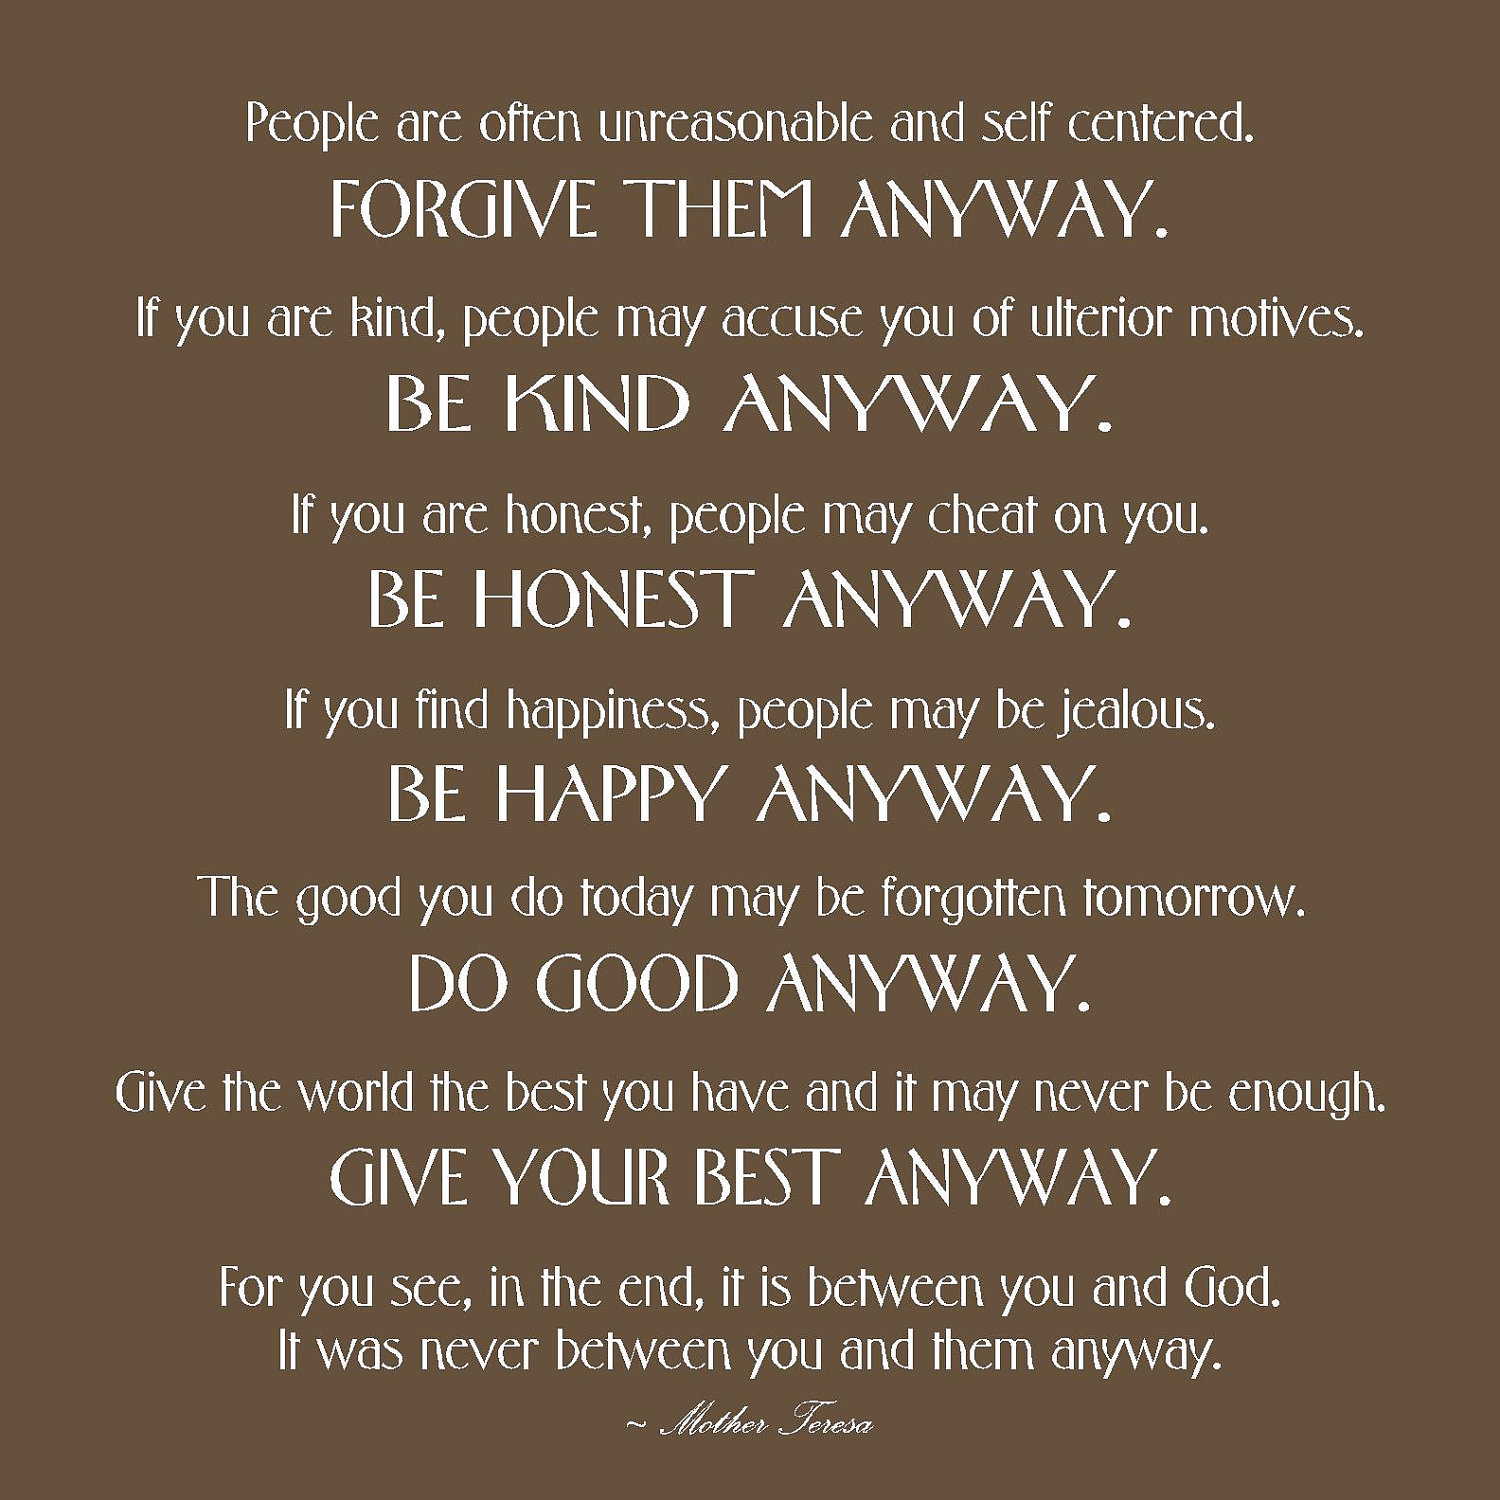 Mother Teresa Quotes On Leadership. Quotesgram